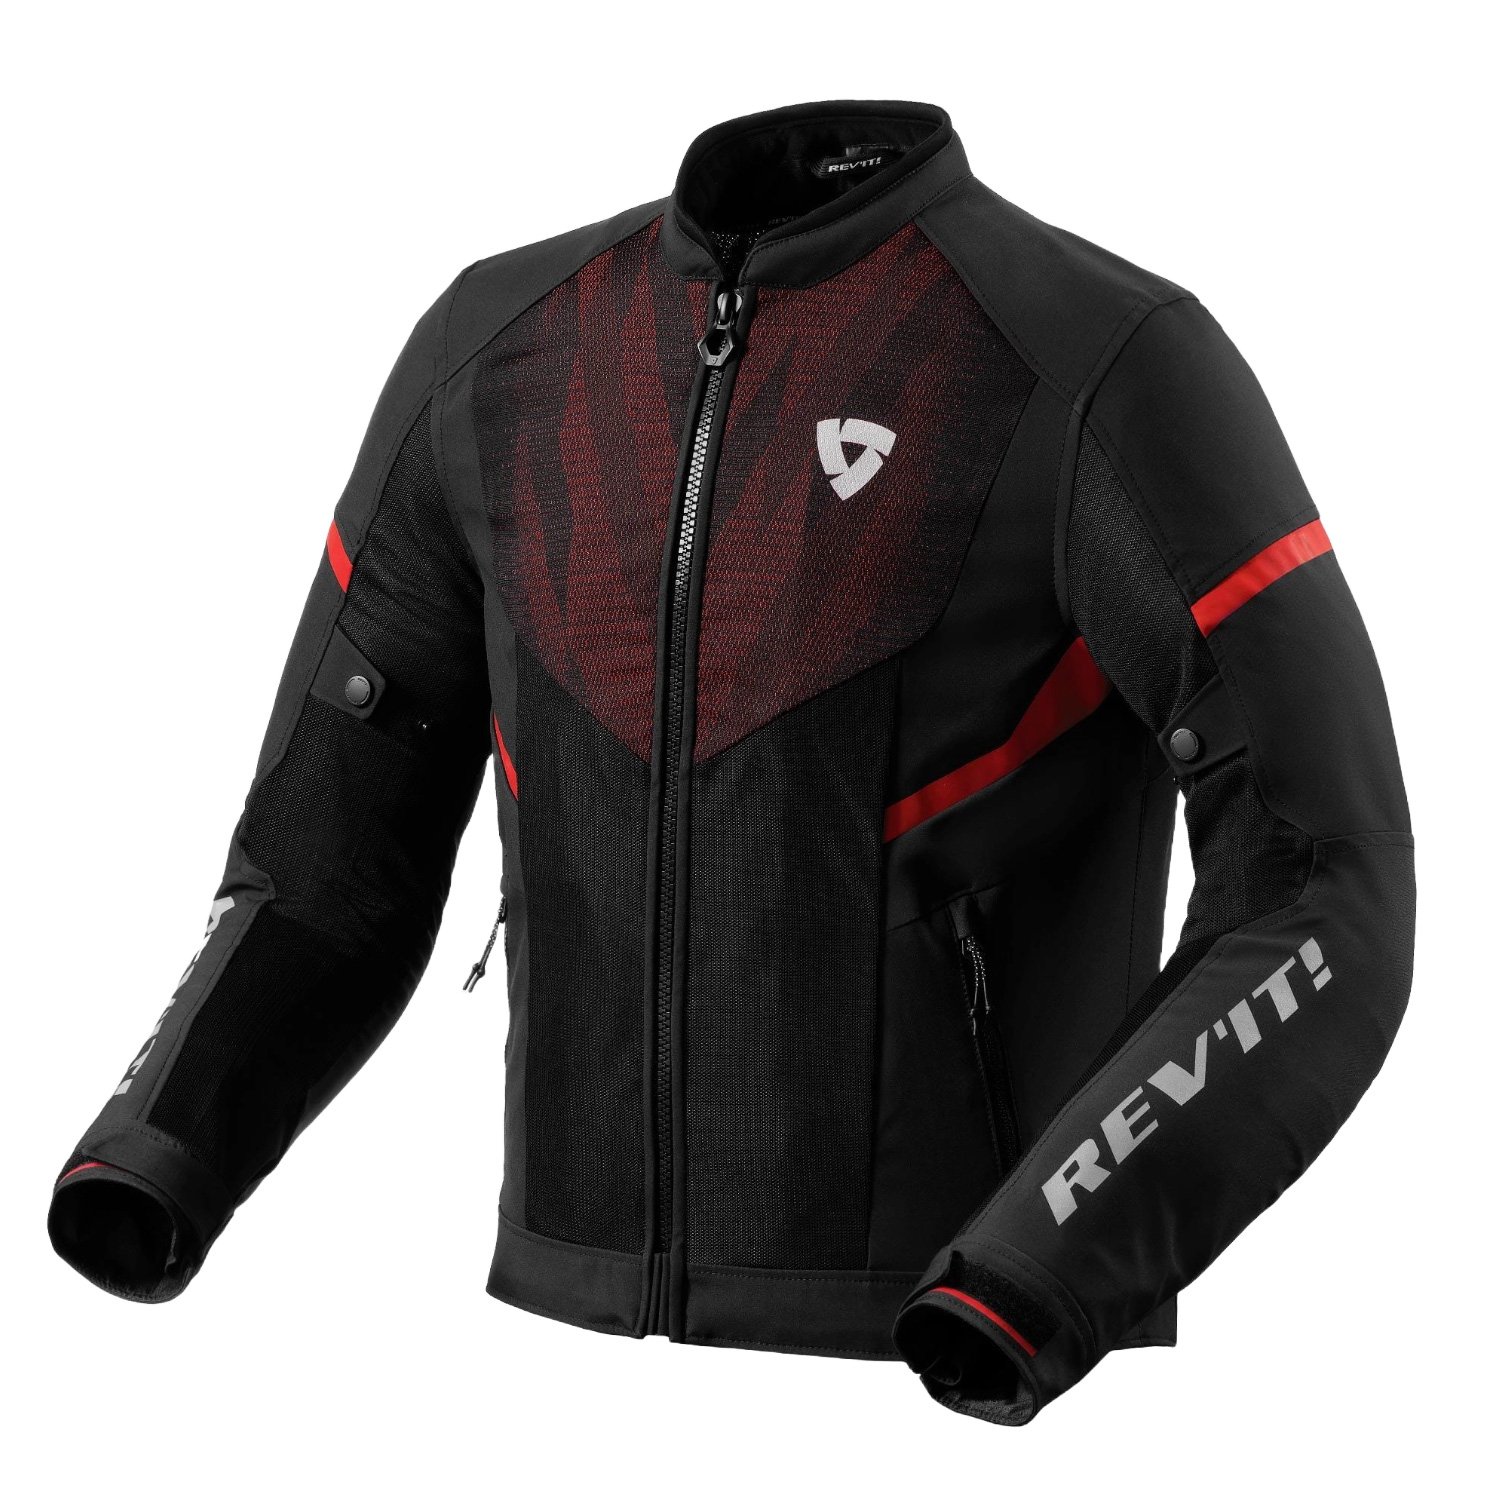 Image of REV'IT! Hyperspeed 2 GT Air Jacket Black Neon Red Talla S